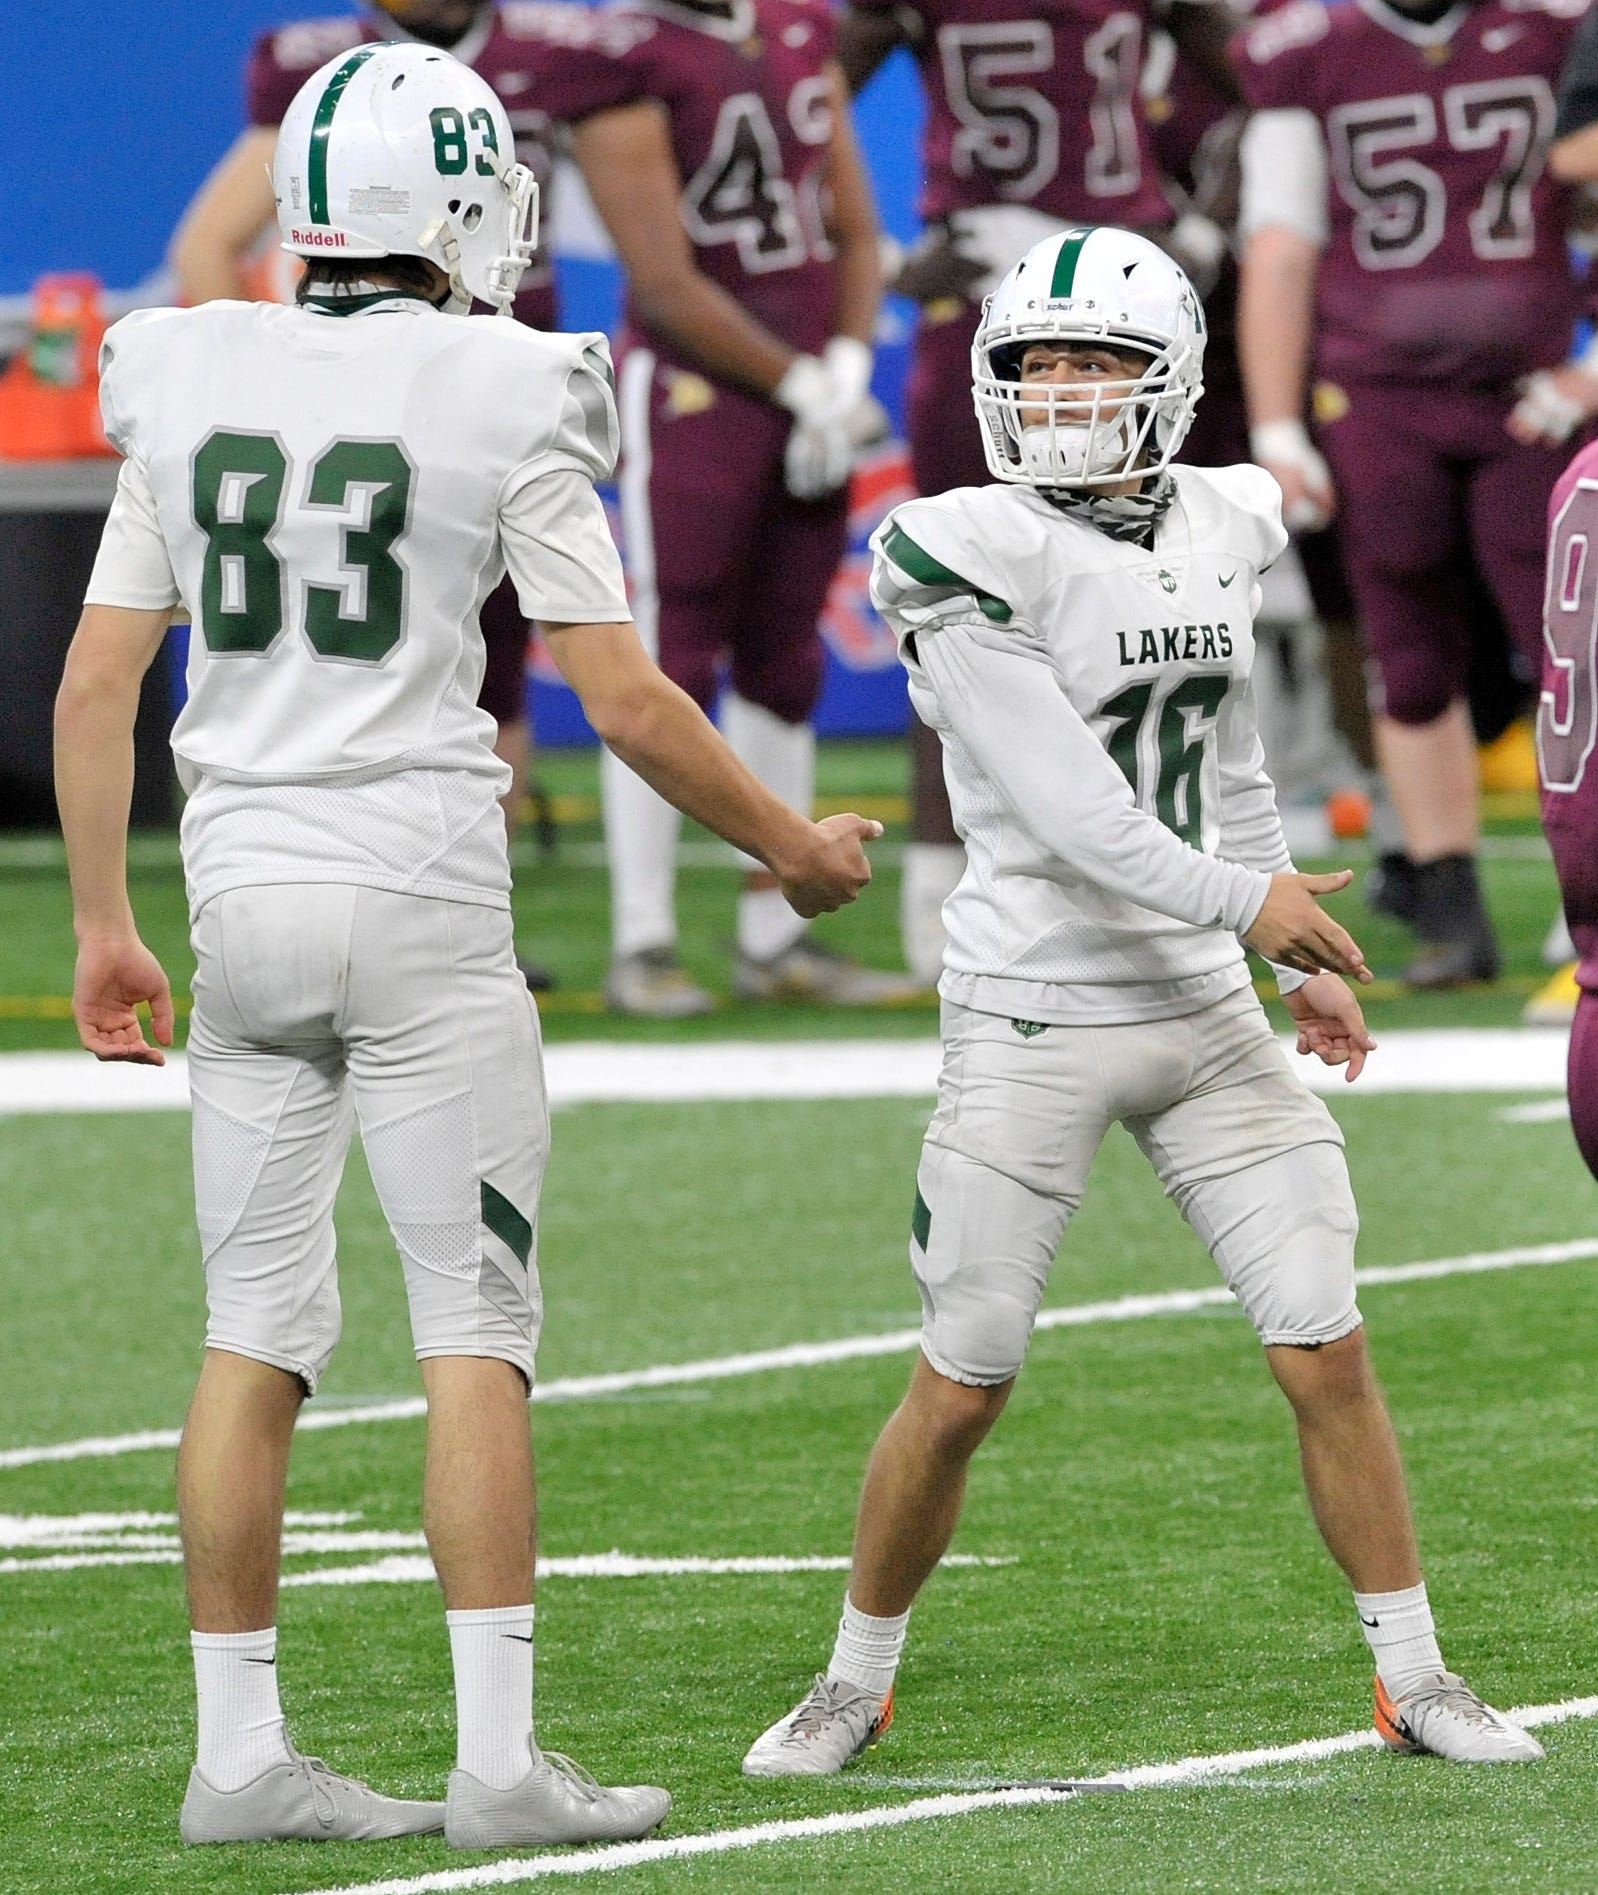 West Bloomfield's Jake Ward (16) celebrates a 45-yard field goal with holder Sammy Lafata (83) in the fourth quarter.